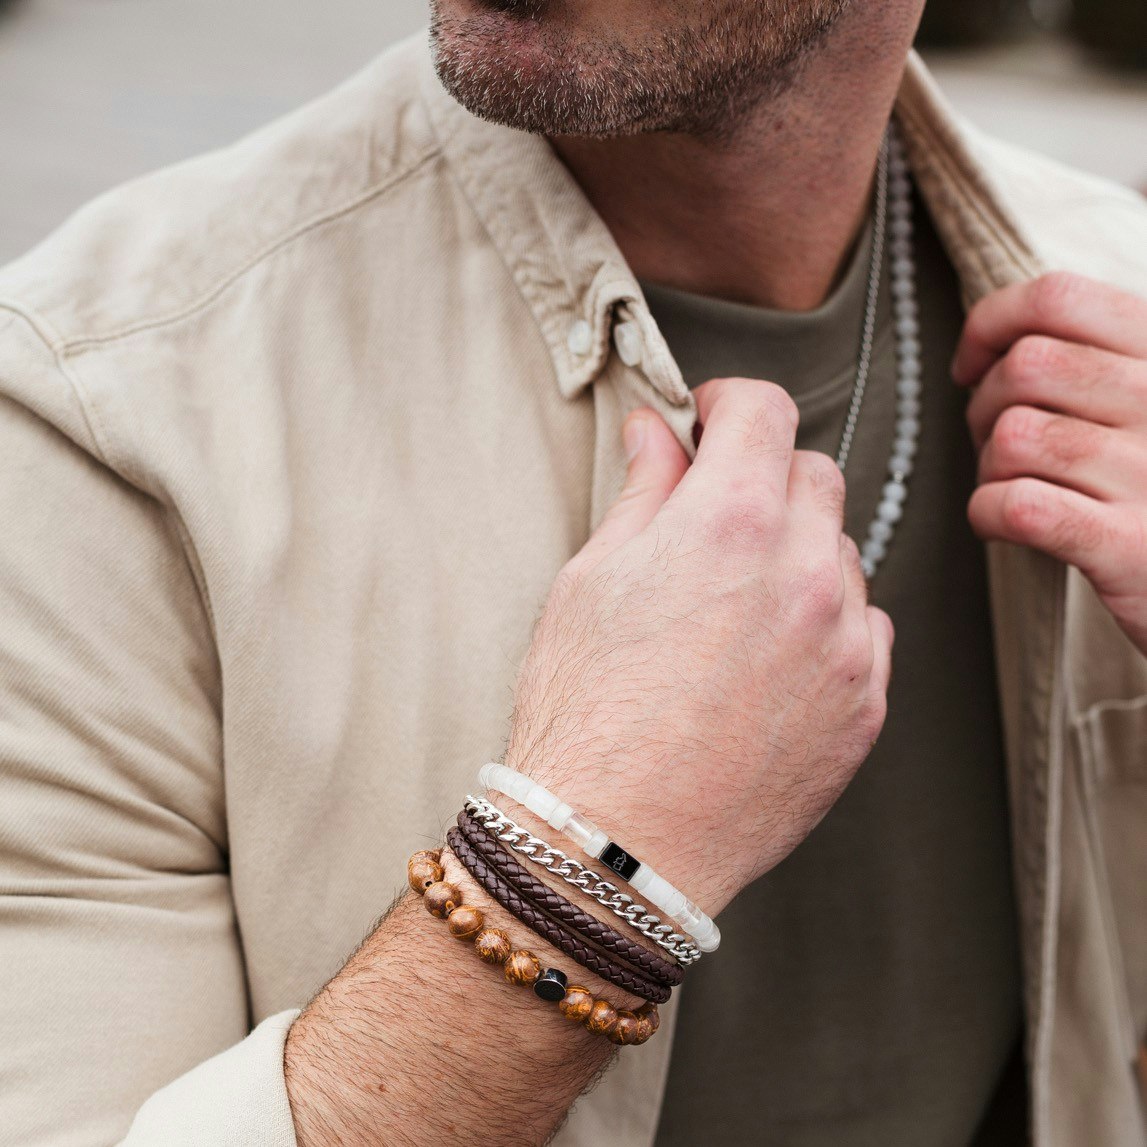 Leather bracelet Double/Round Brown